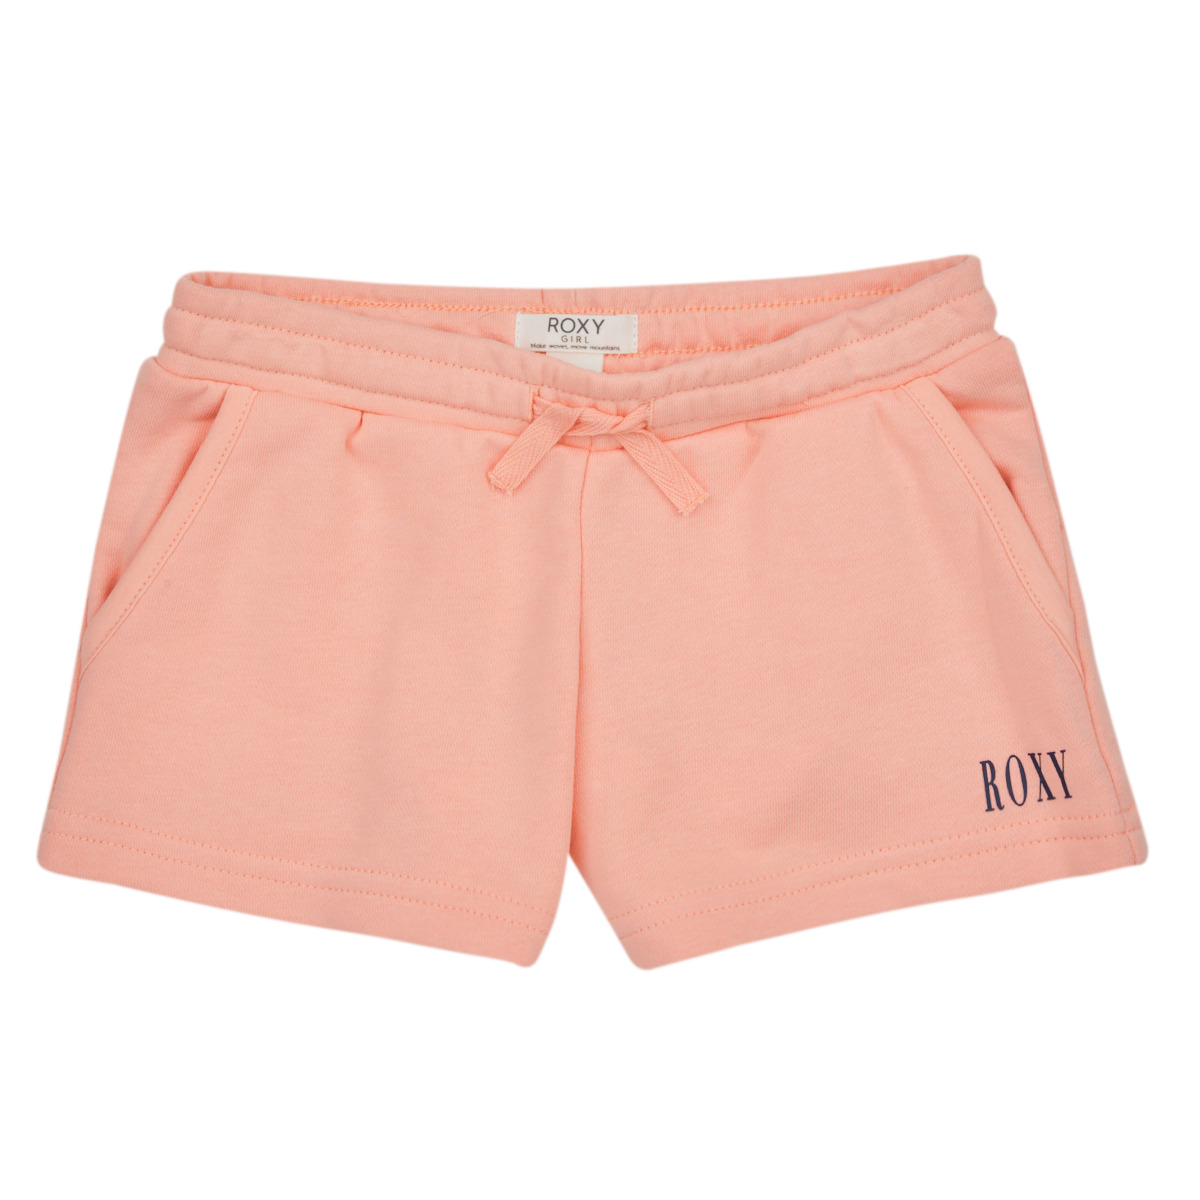 Roxy HAPPINESS FOREVER SHORT ORIGIN Child delivery Pink - - Shorts Spartoo Free NET Clothing Bermudas / ! 